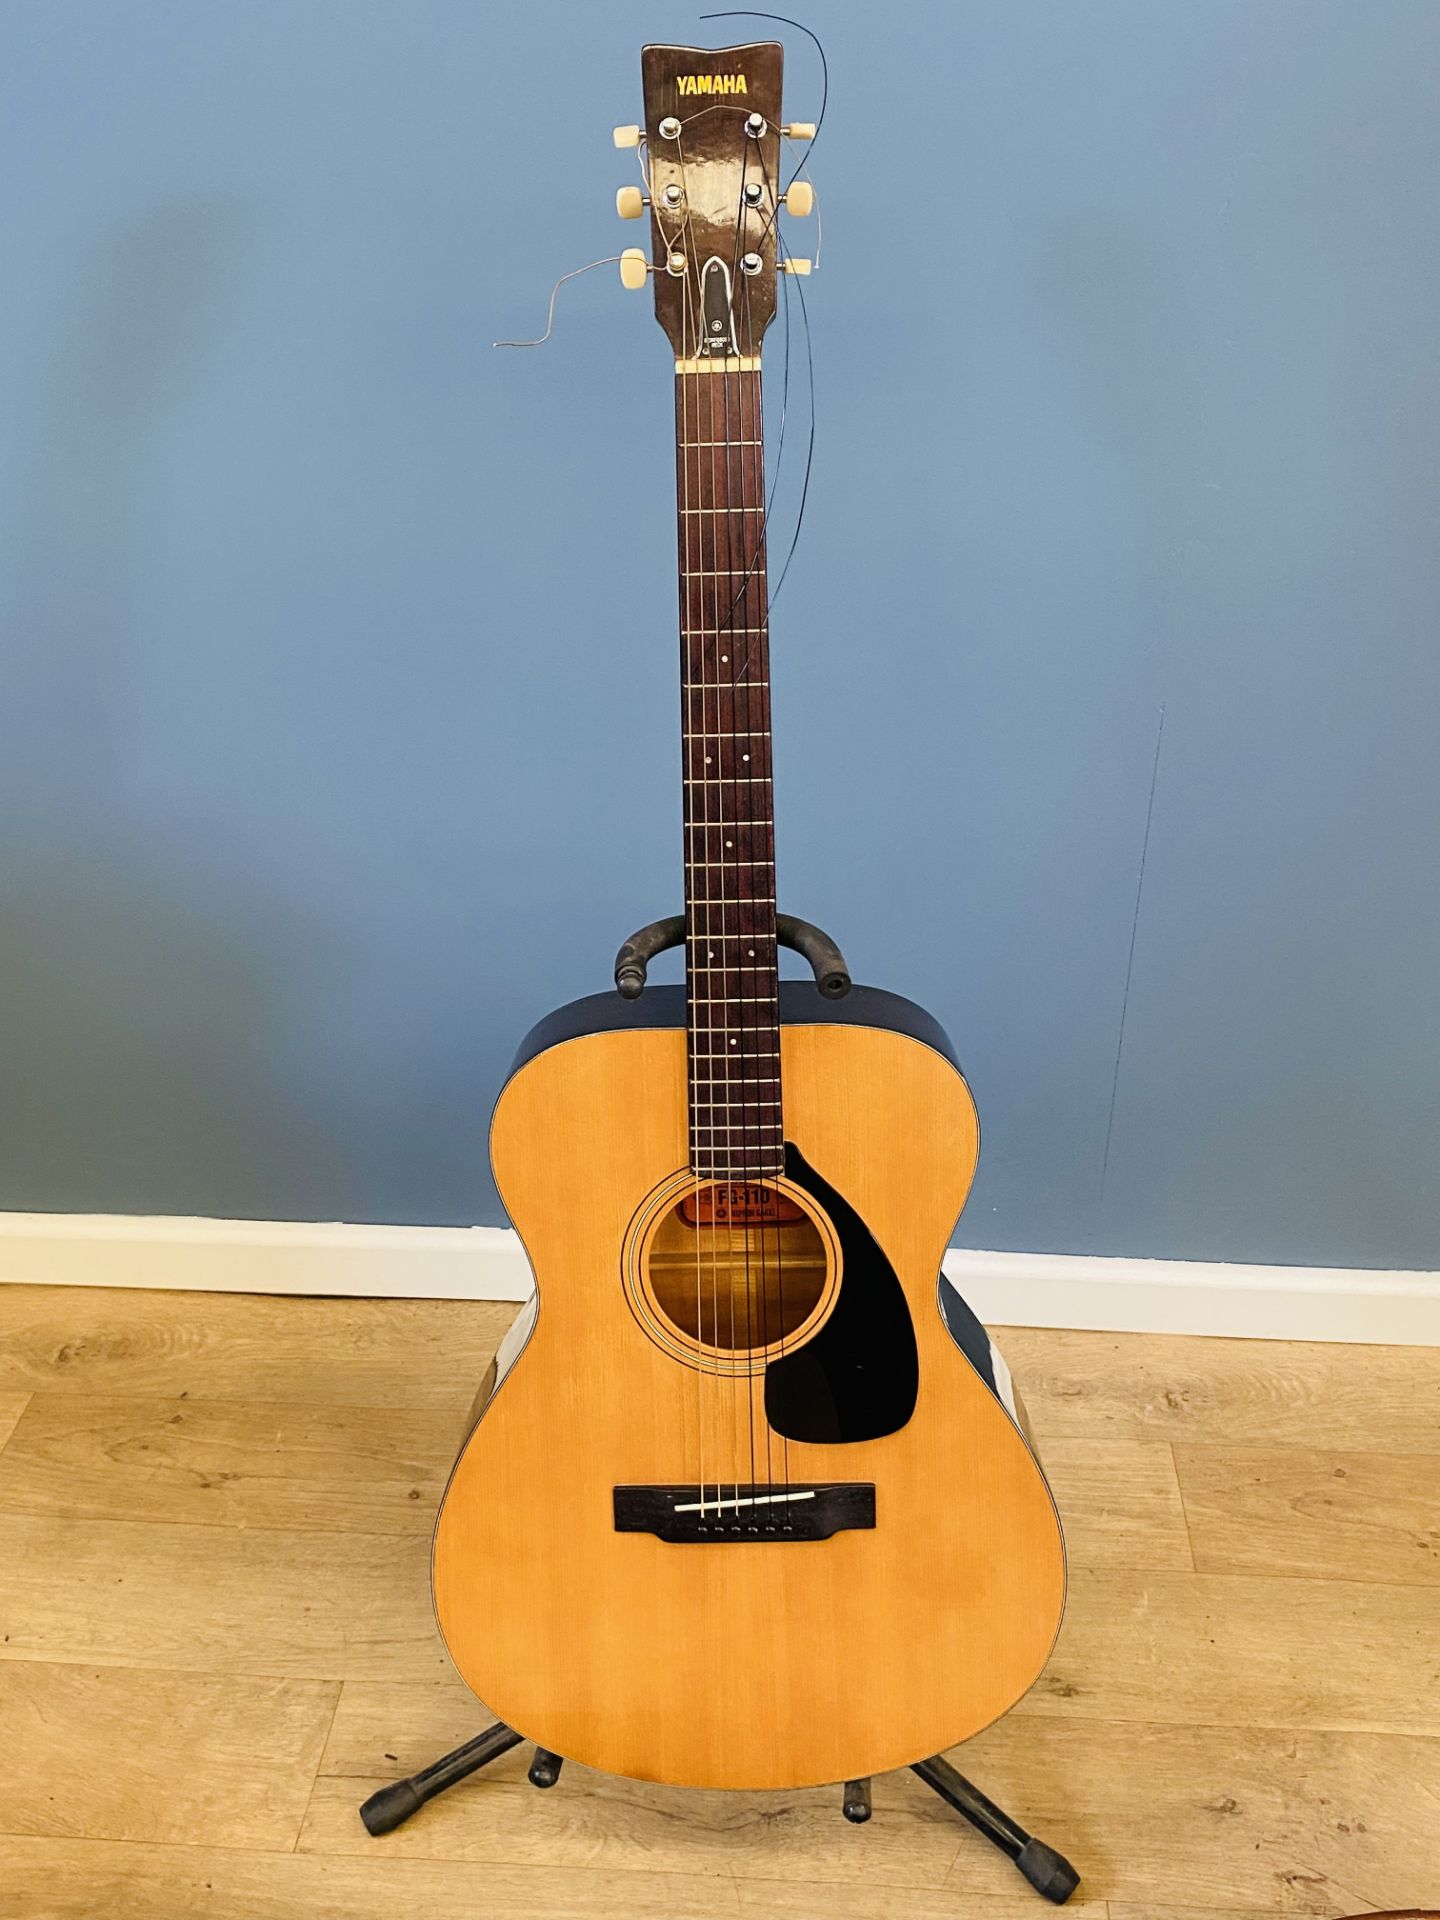 Yamaha FG-10 acoustic guitar in case - Image 2 of 4